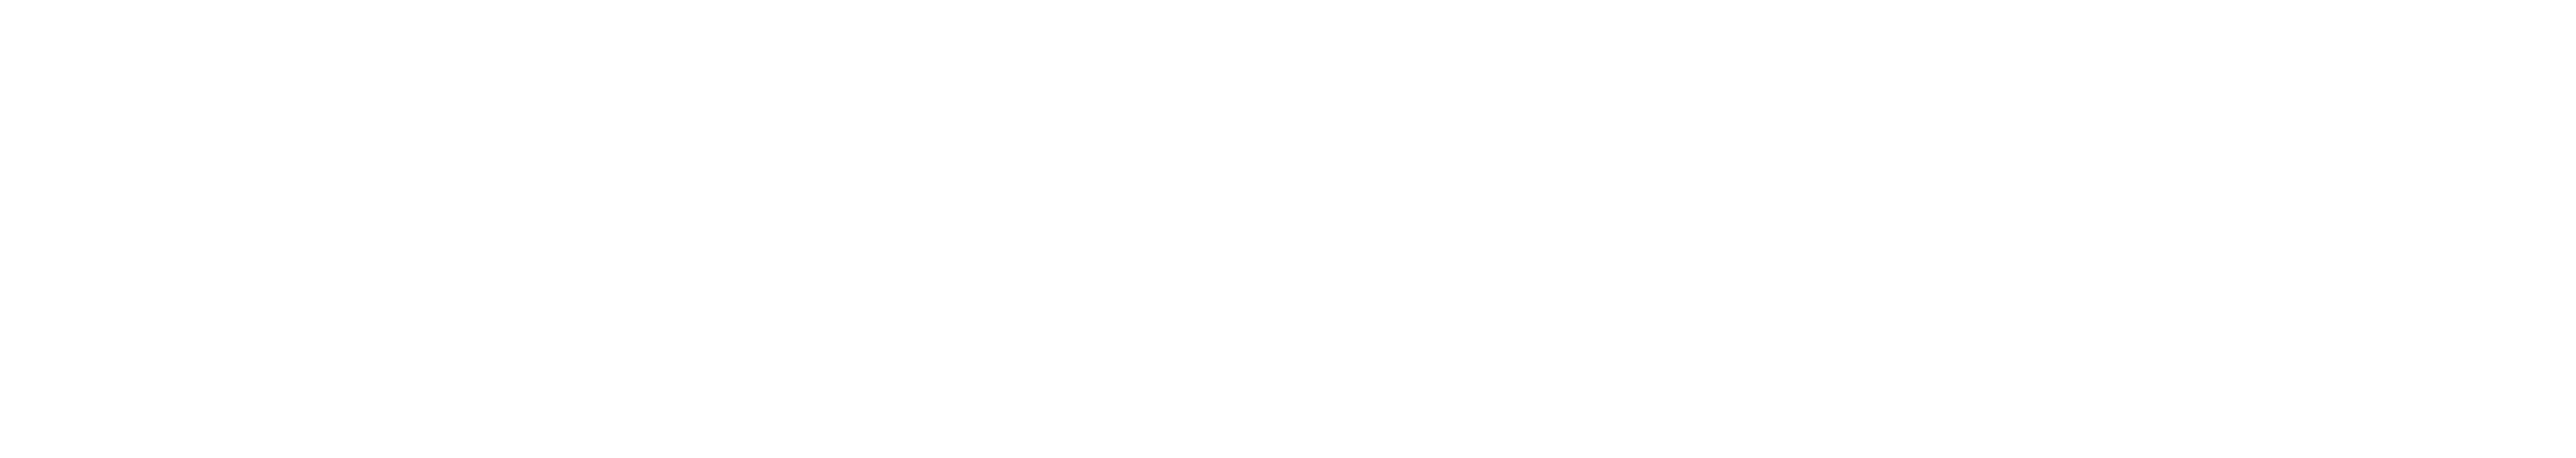 Department of Health and Human Services image